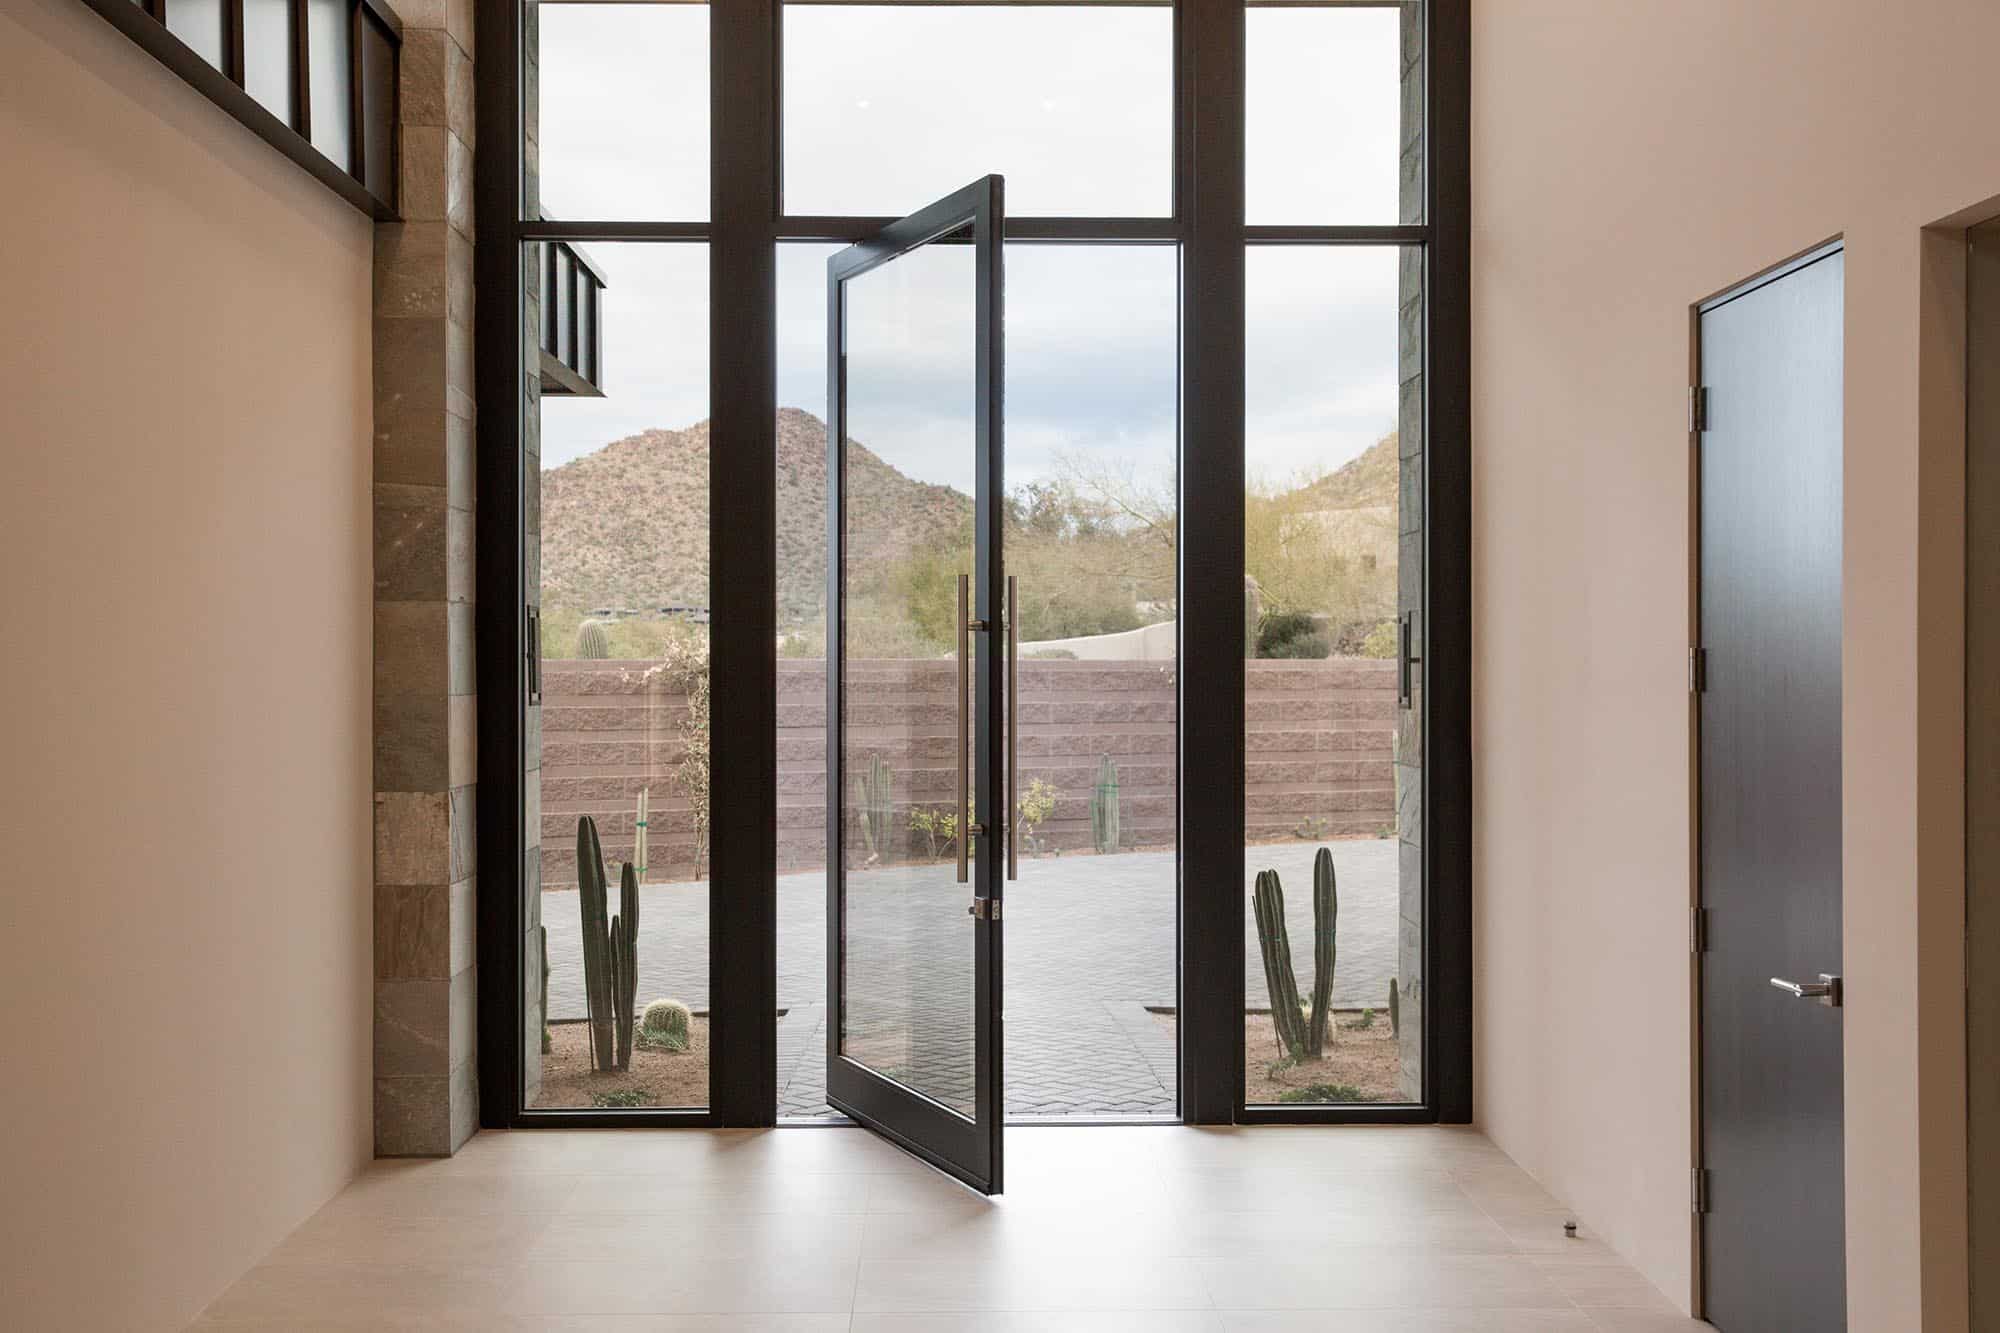 A large pivot door surrounded by glass panes opens the entryway to the desert.